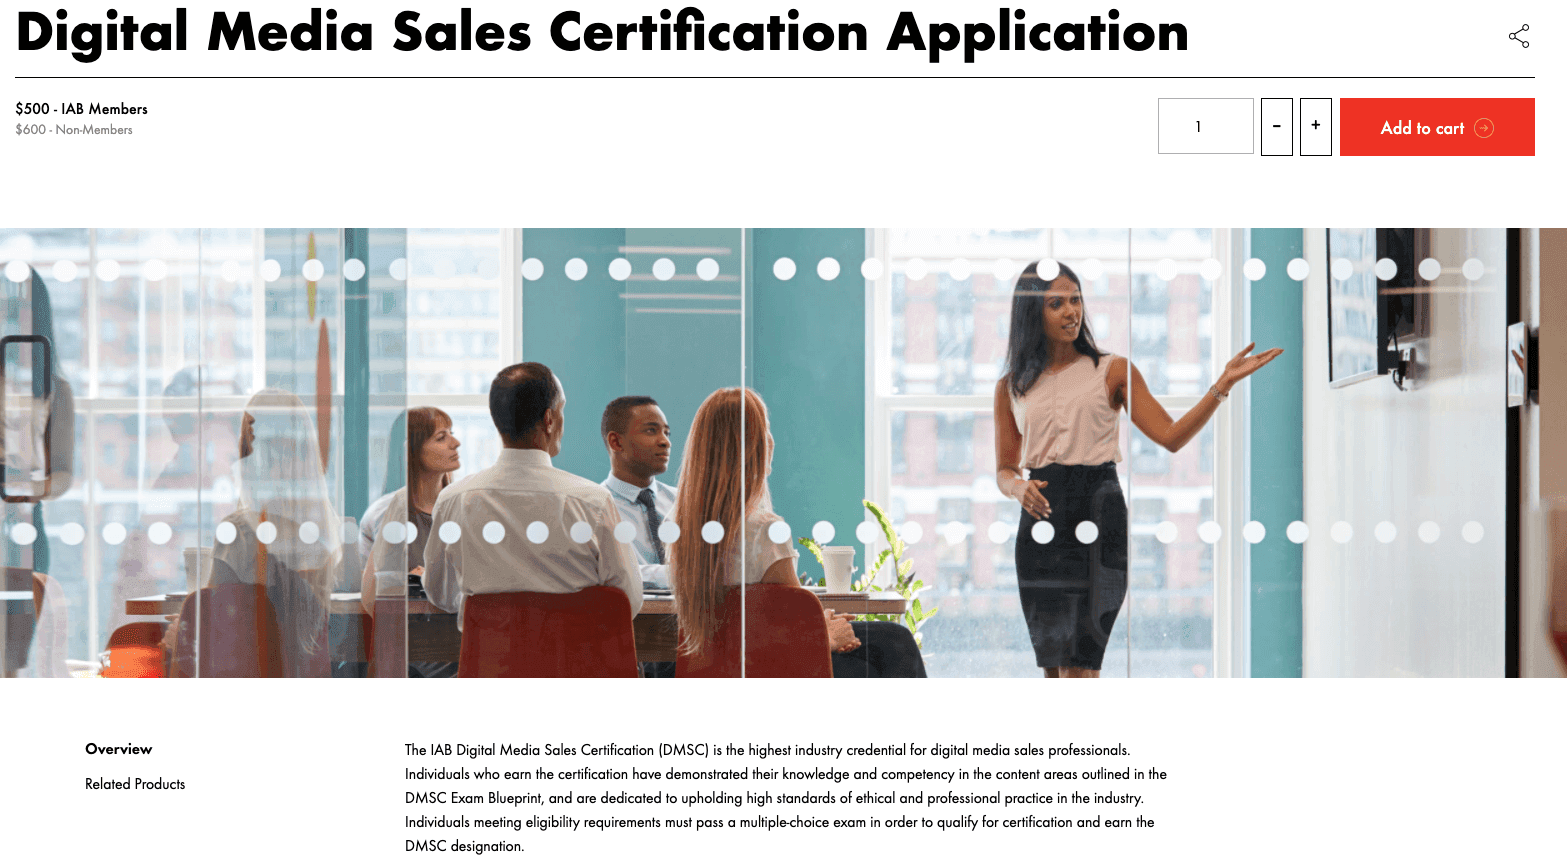 28 Marketing Certifications to Take Your Career to the Next Level